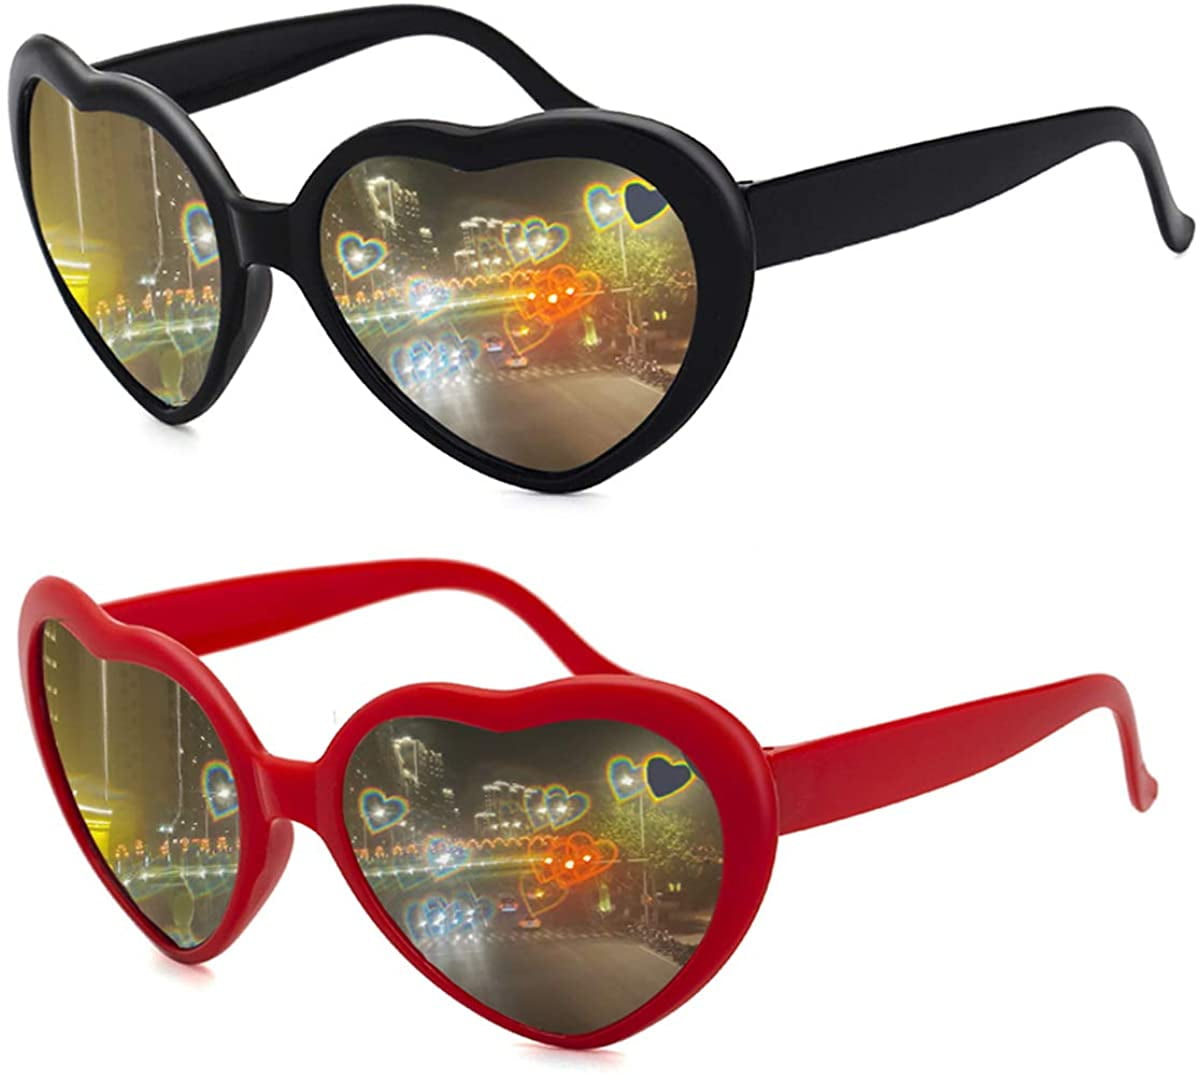 Festivals Party and More Love Heart Shaped Glasses Light Changing Heart Effect Diffraction Glasses for Women Men Raves 